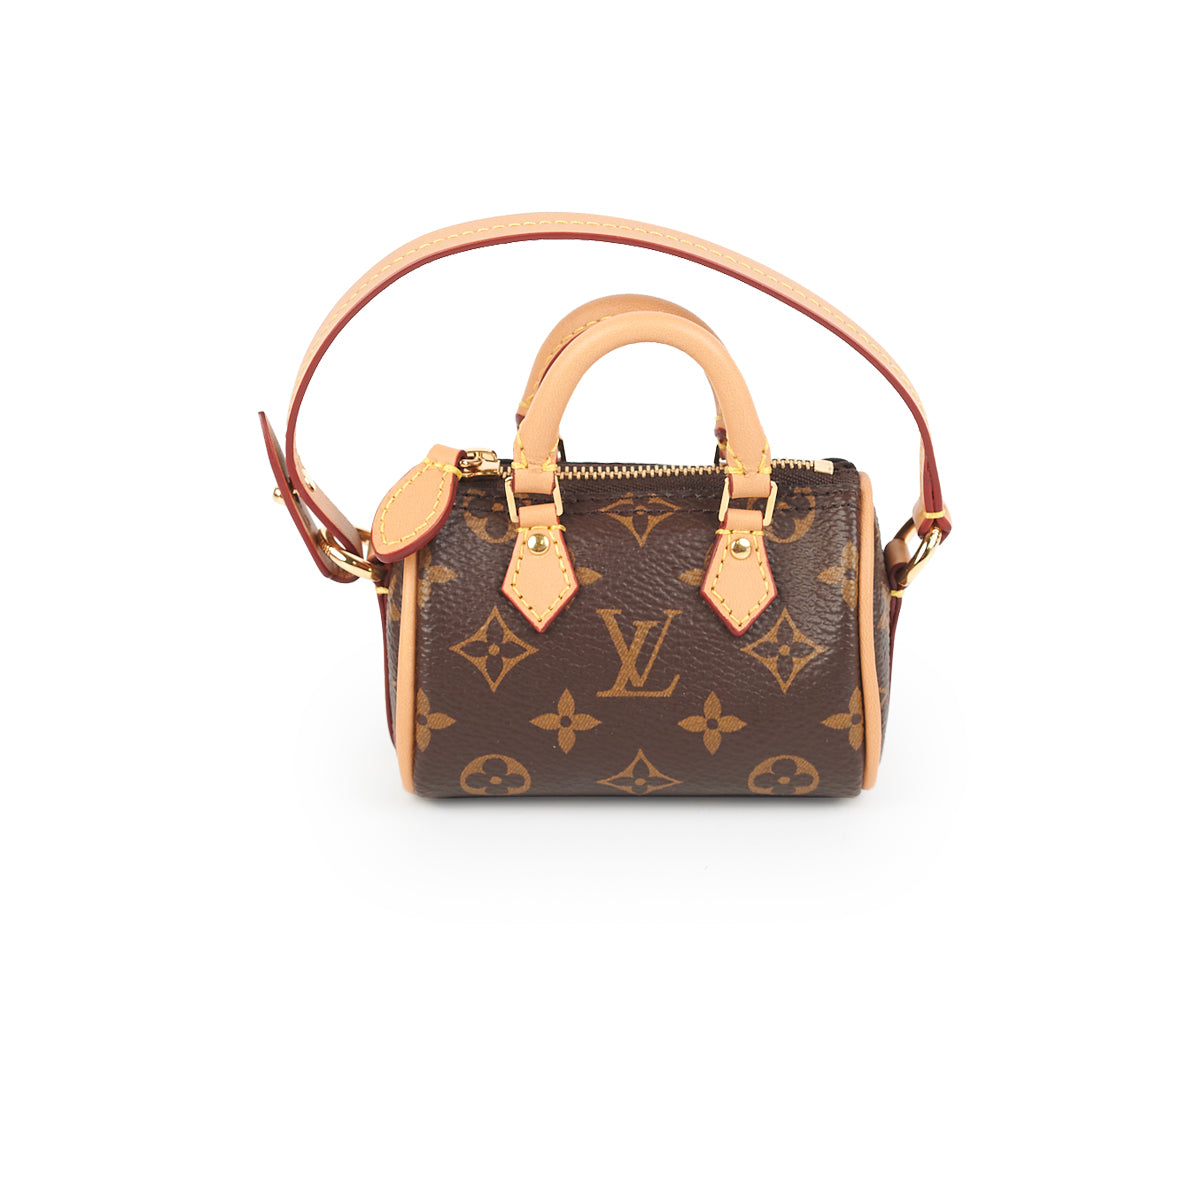 louisvuitton micro #speedy #bagcharm We were lucky enough to find